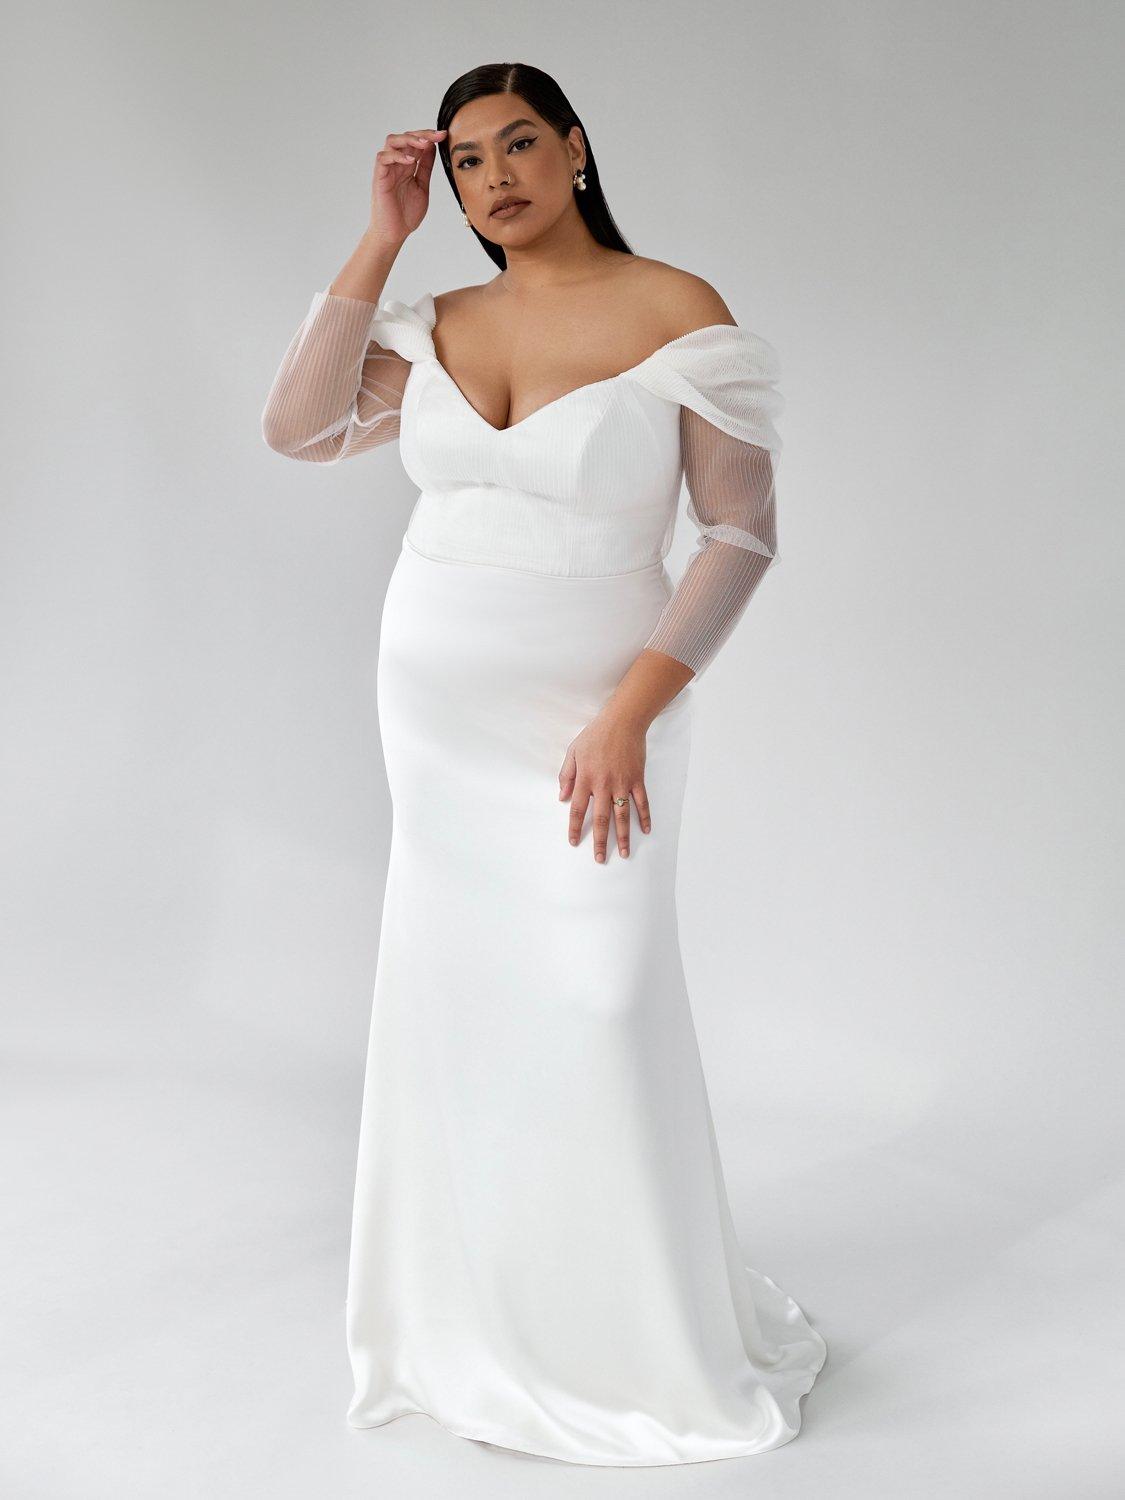 How To Find the Perfect Wedding Dress & Shapewear for Your Body Type -  Hourglass Angel